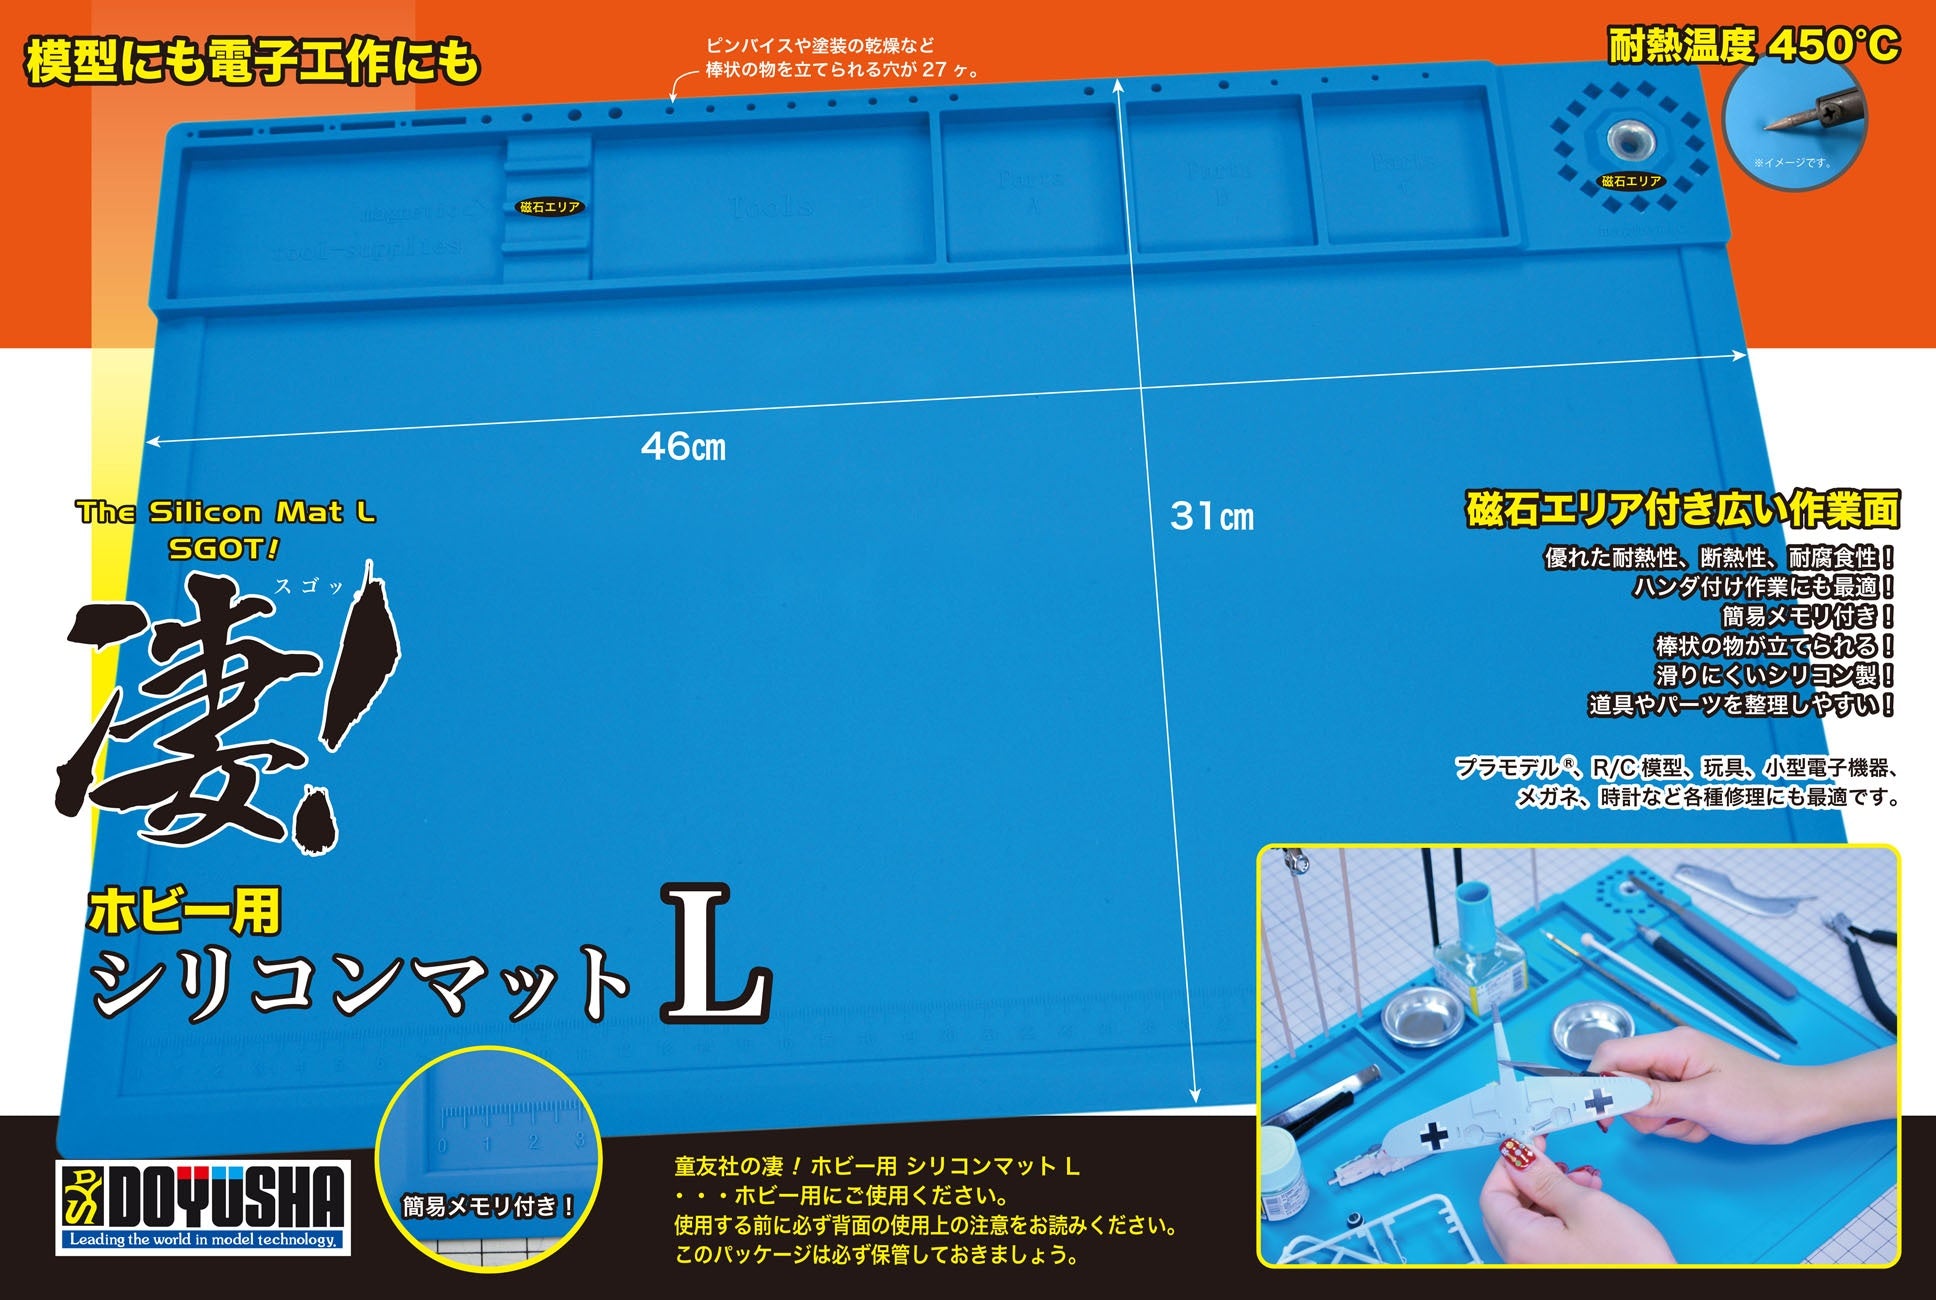 130230 SGOT! Silicon Work Mat for Hobby L